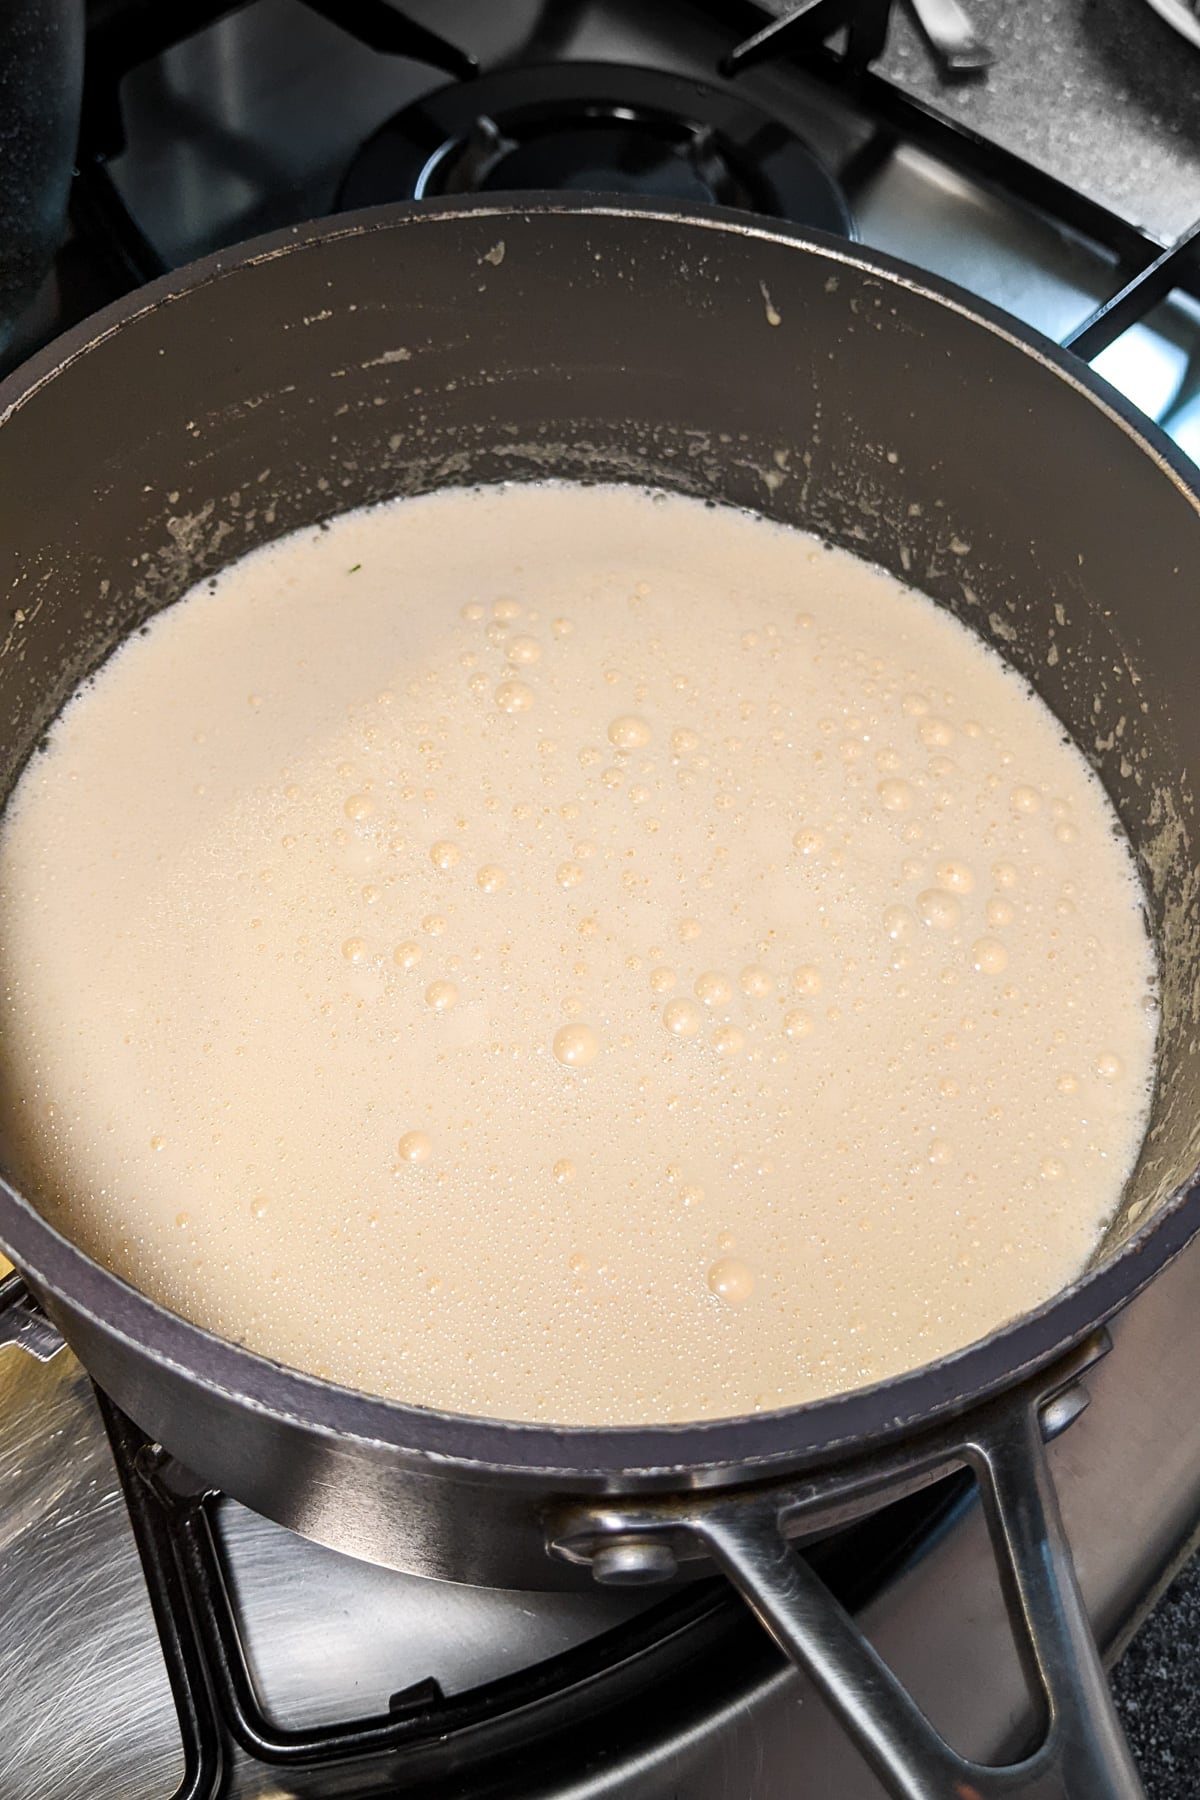 Boiled creamy sauce in a sauce pan on the stove.